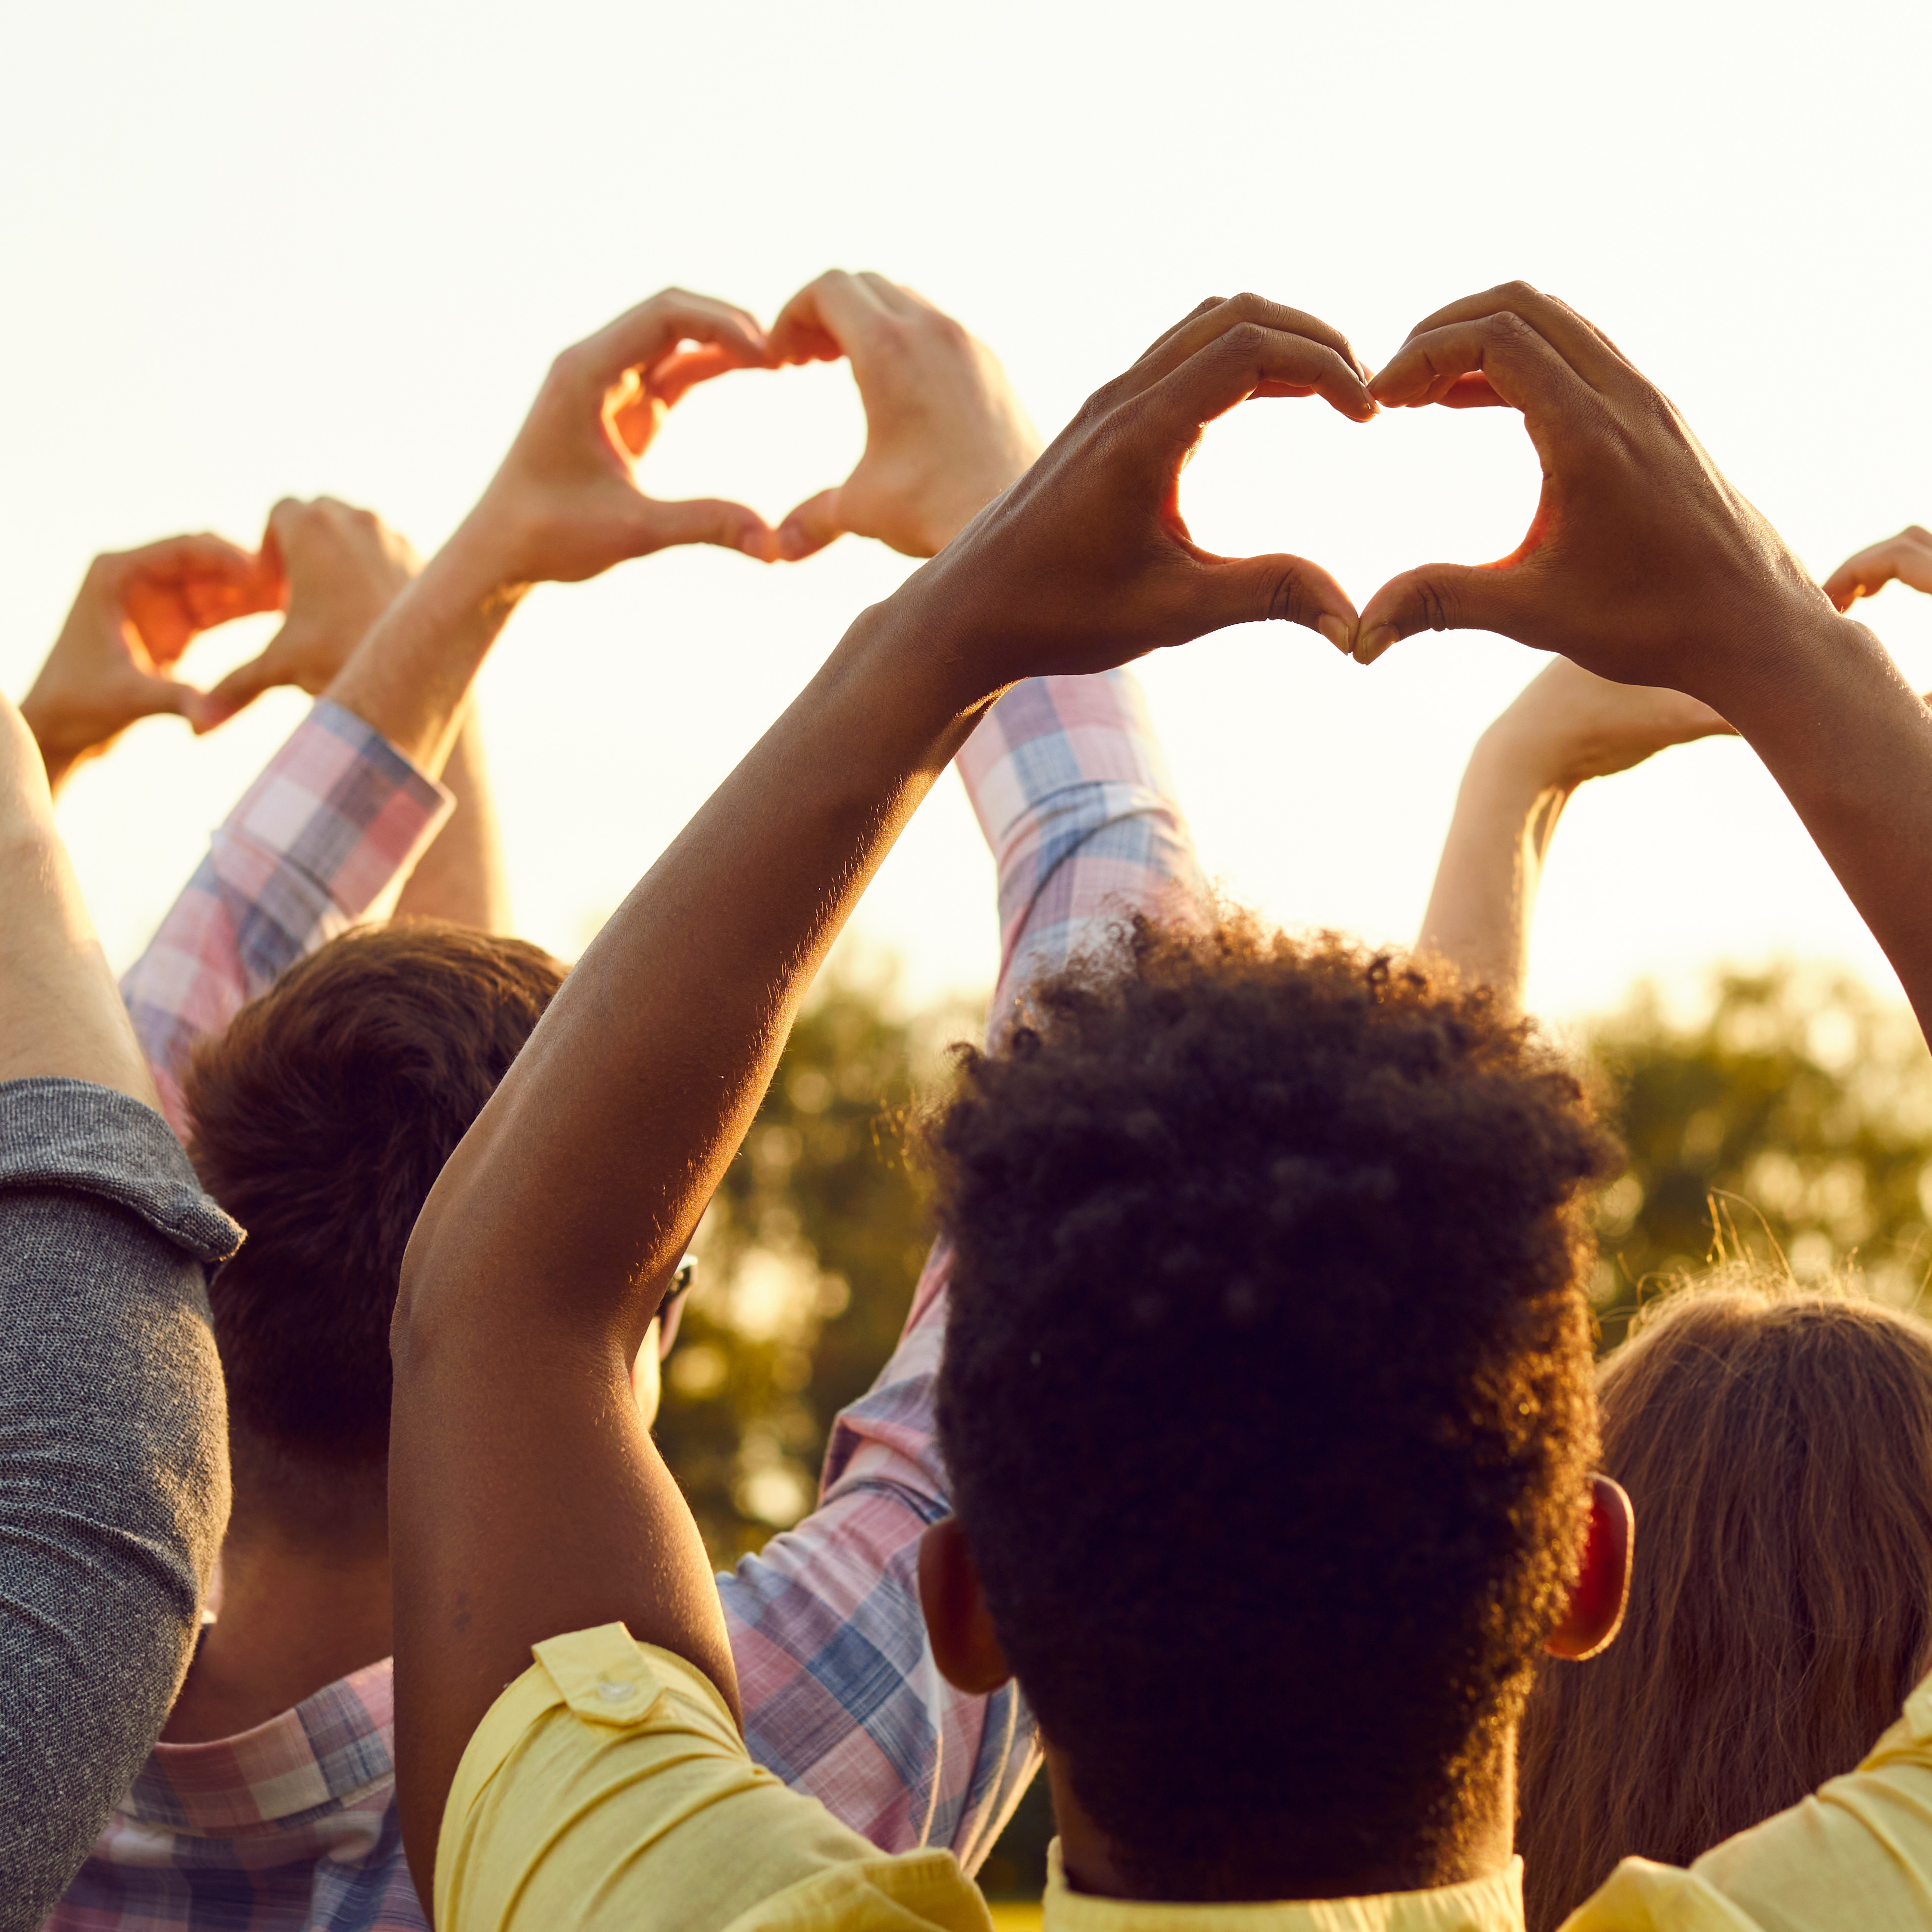 Group of people with arms raised making the shape of a heart with their hands